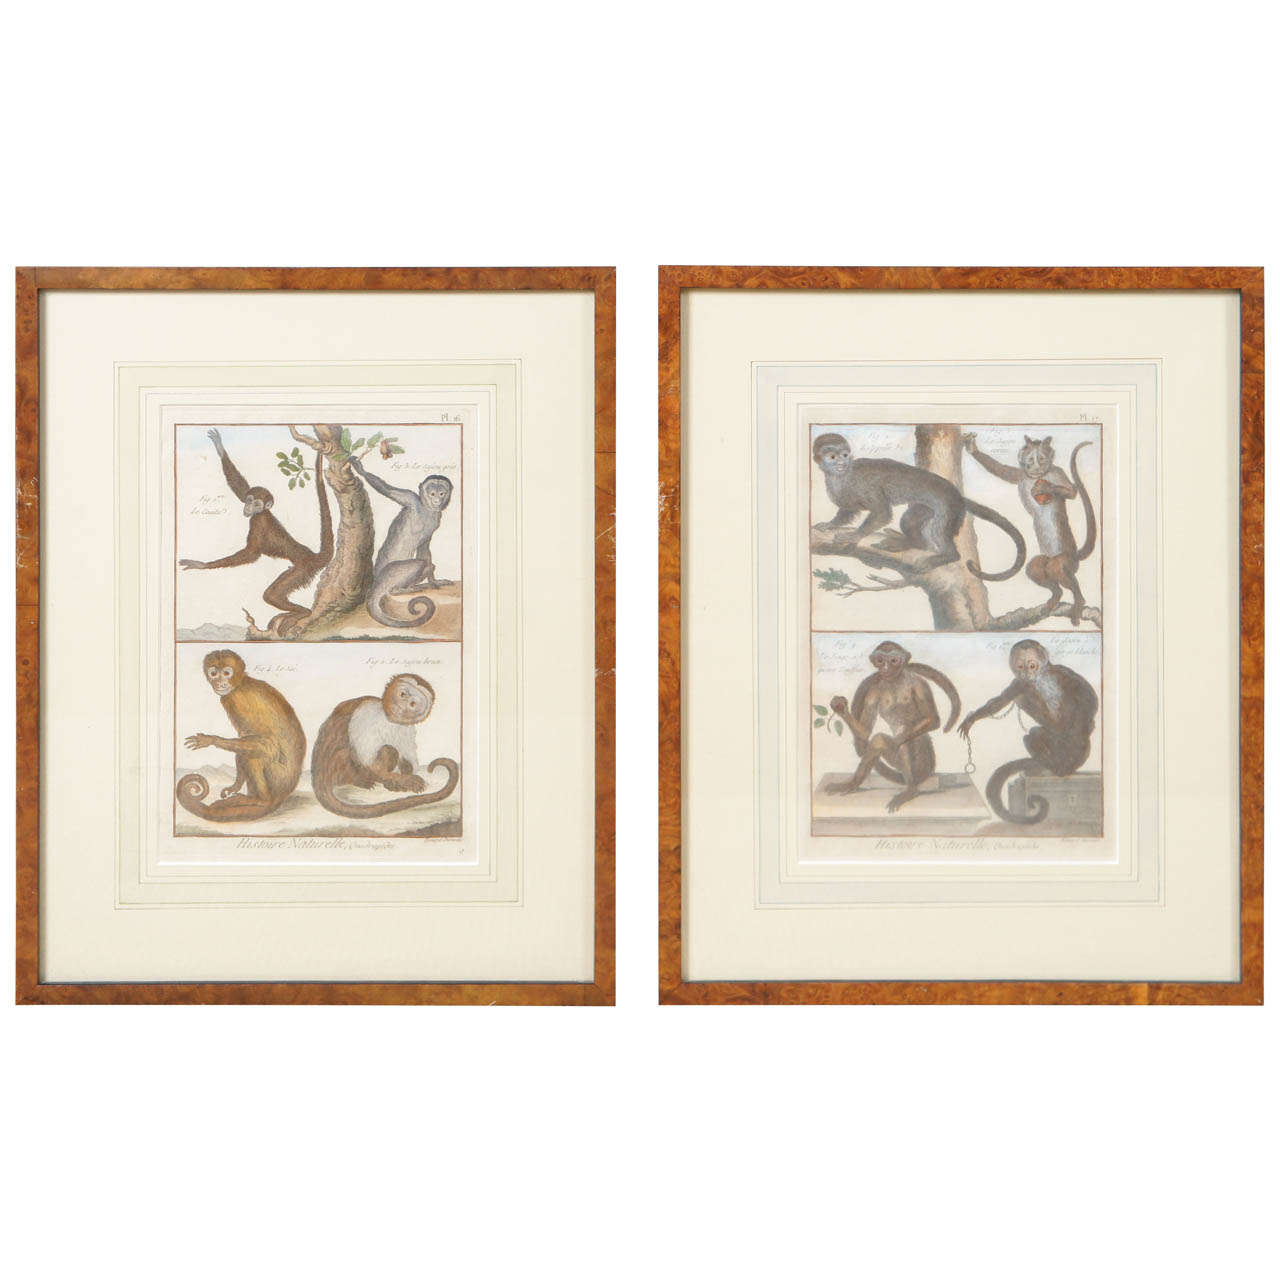 French 18th Century Hand Colored Engravings of Monkeys